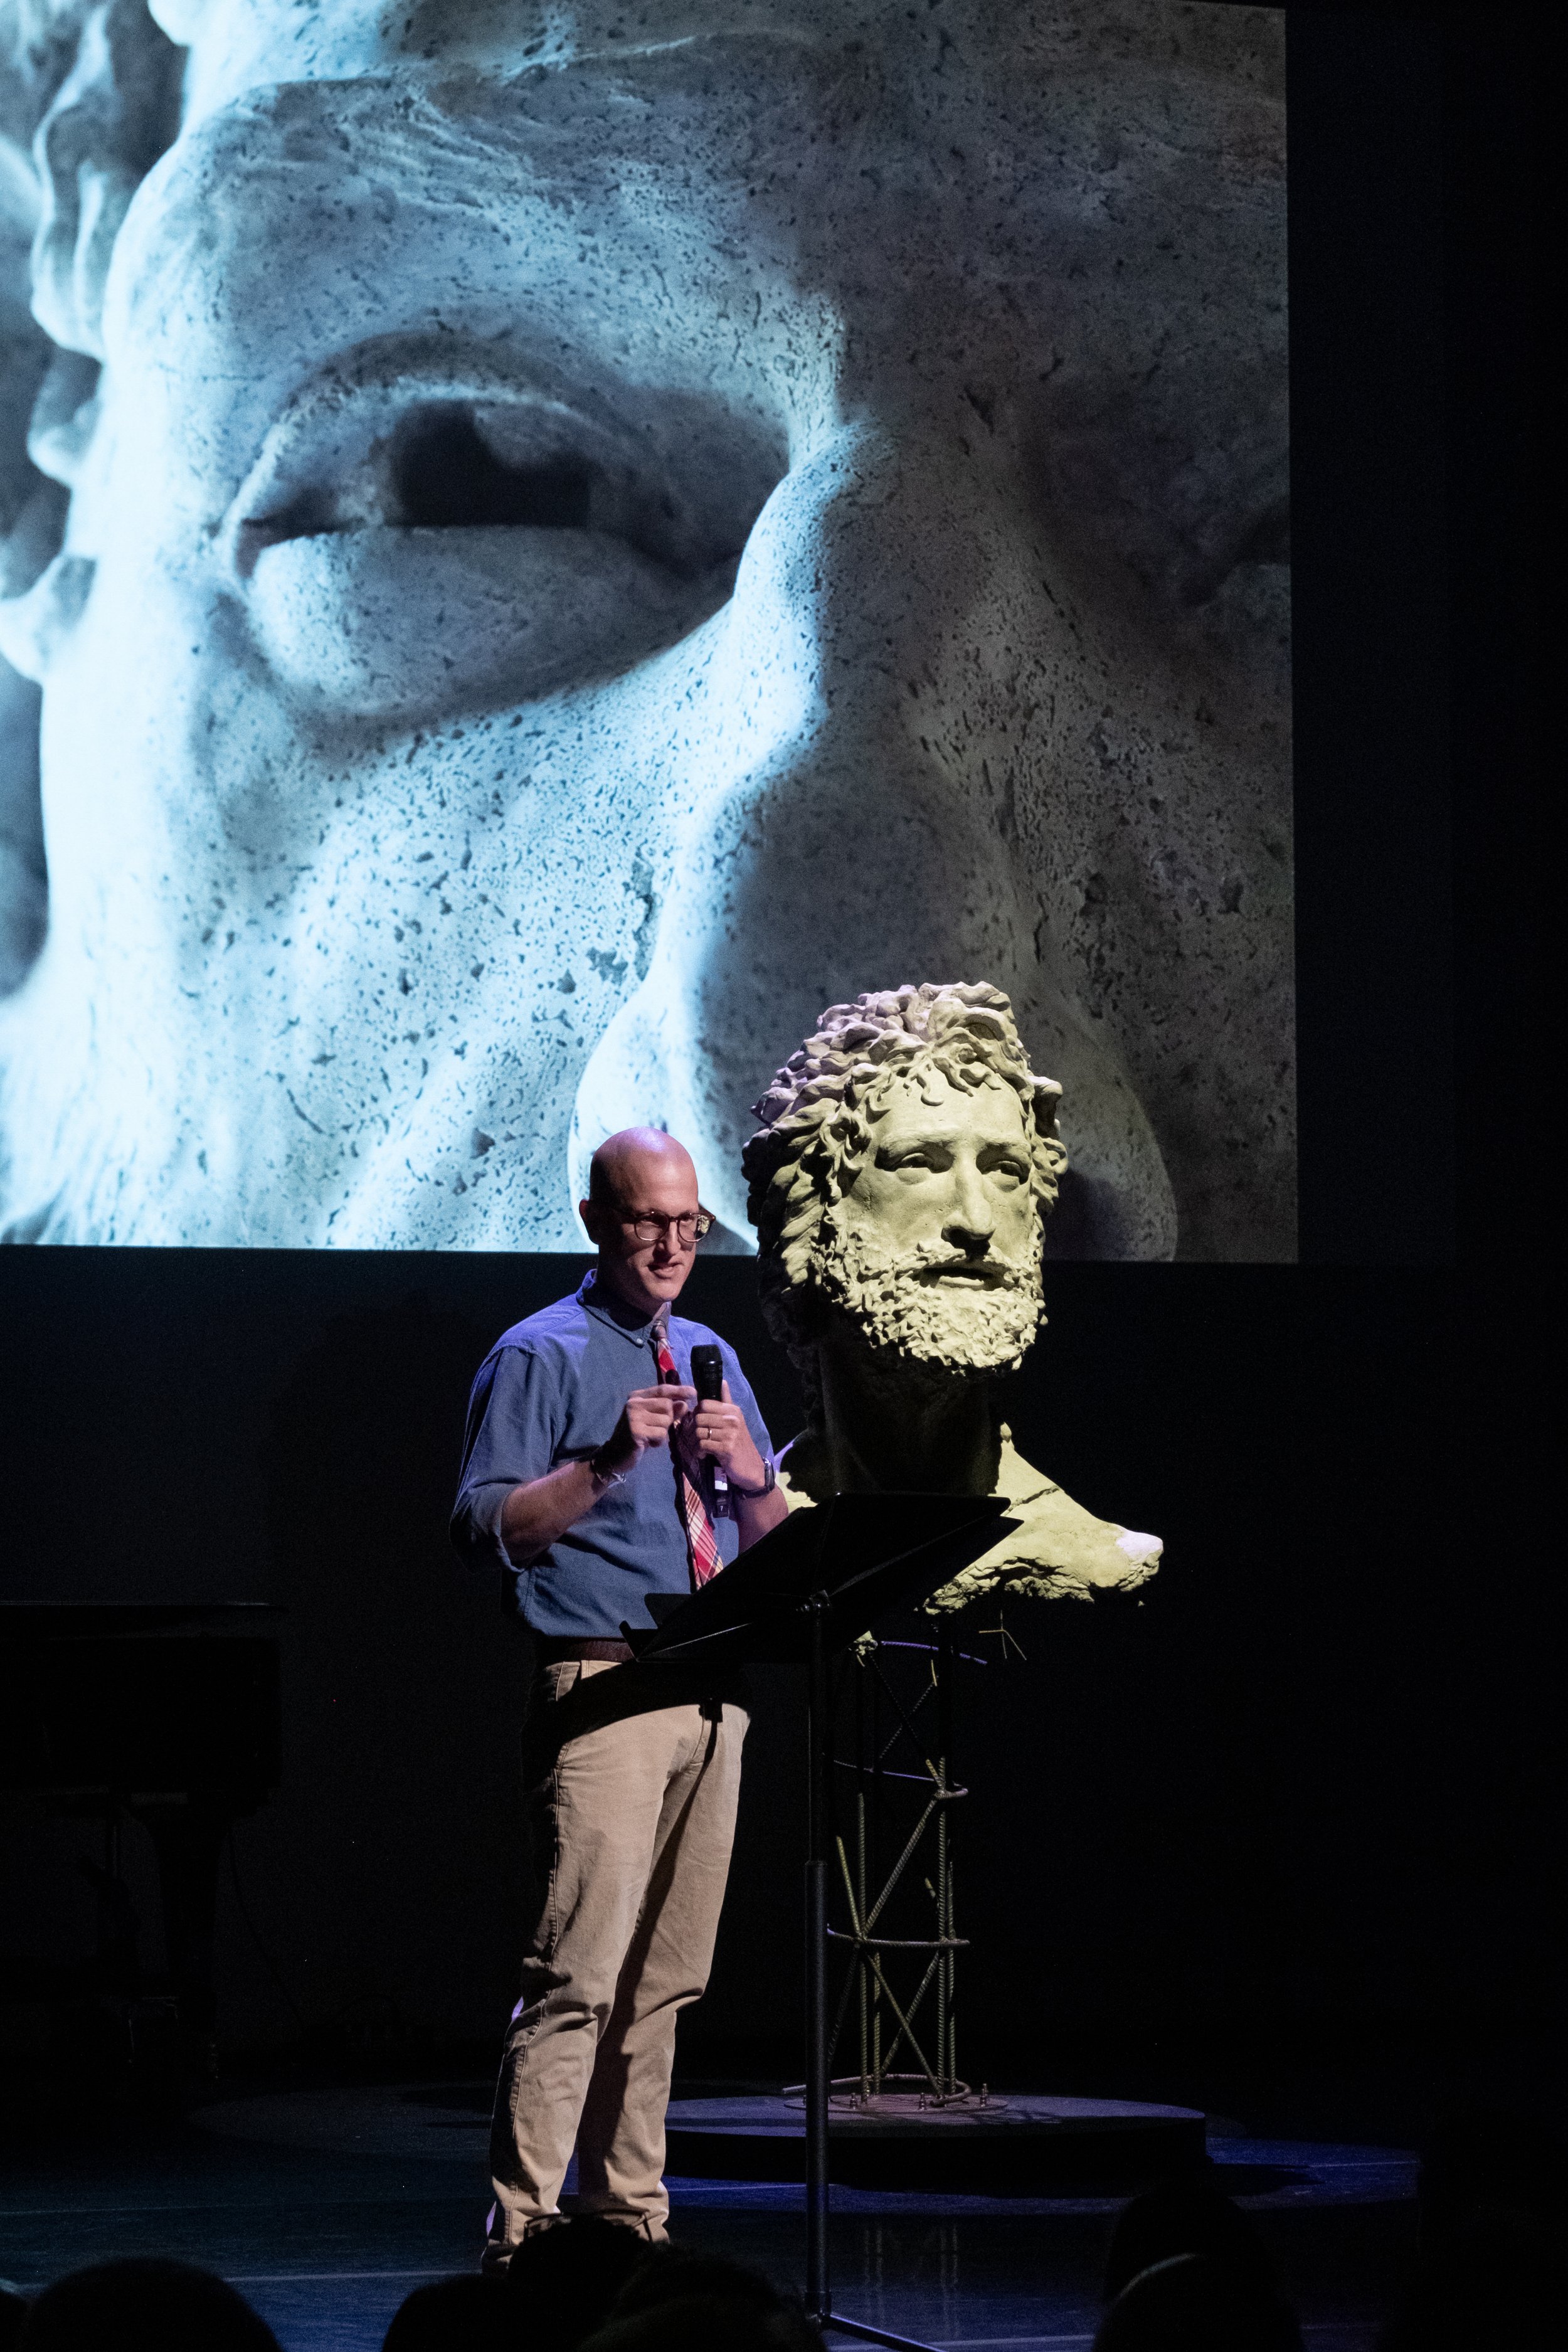  Sculptor Daniel Crosby created and presented his piece, “Decreased: An Interpretation of John the Baptist,” exploring the contrast between humanity’s desire to leave a legacy and John the Baptist’s conviction that God must “increase” while he must “